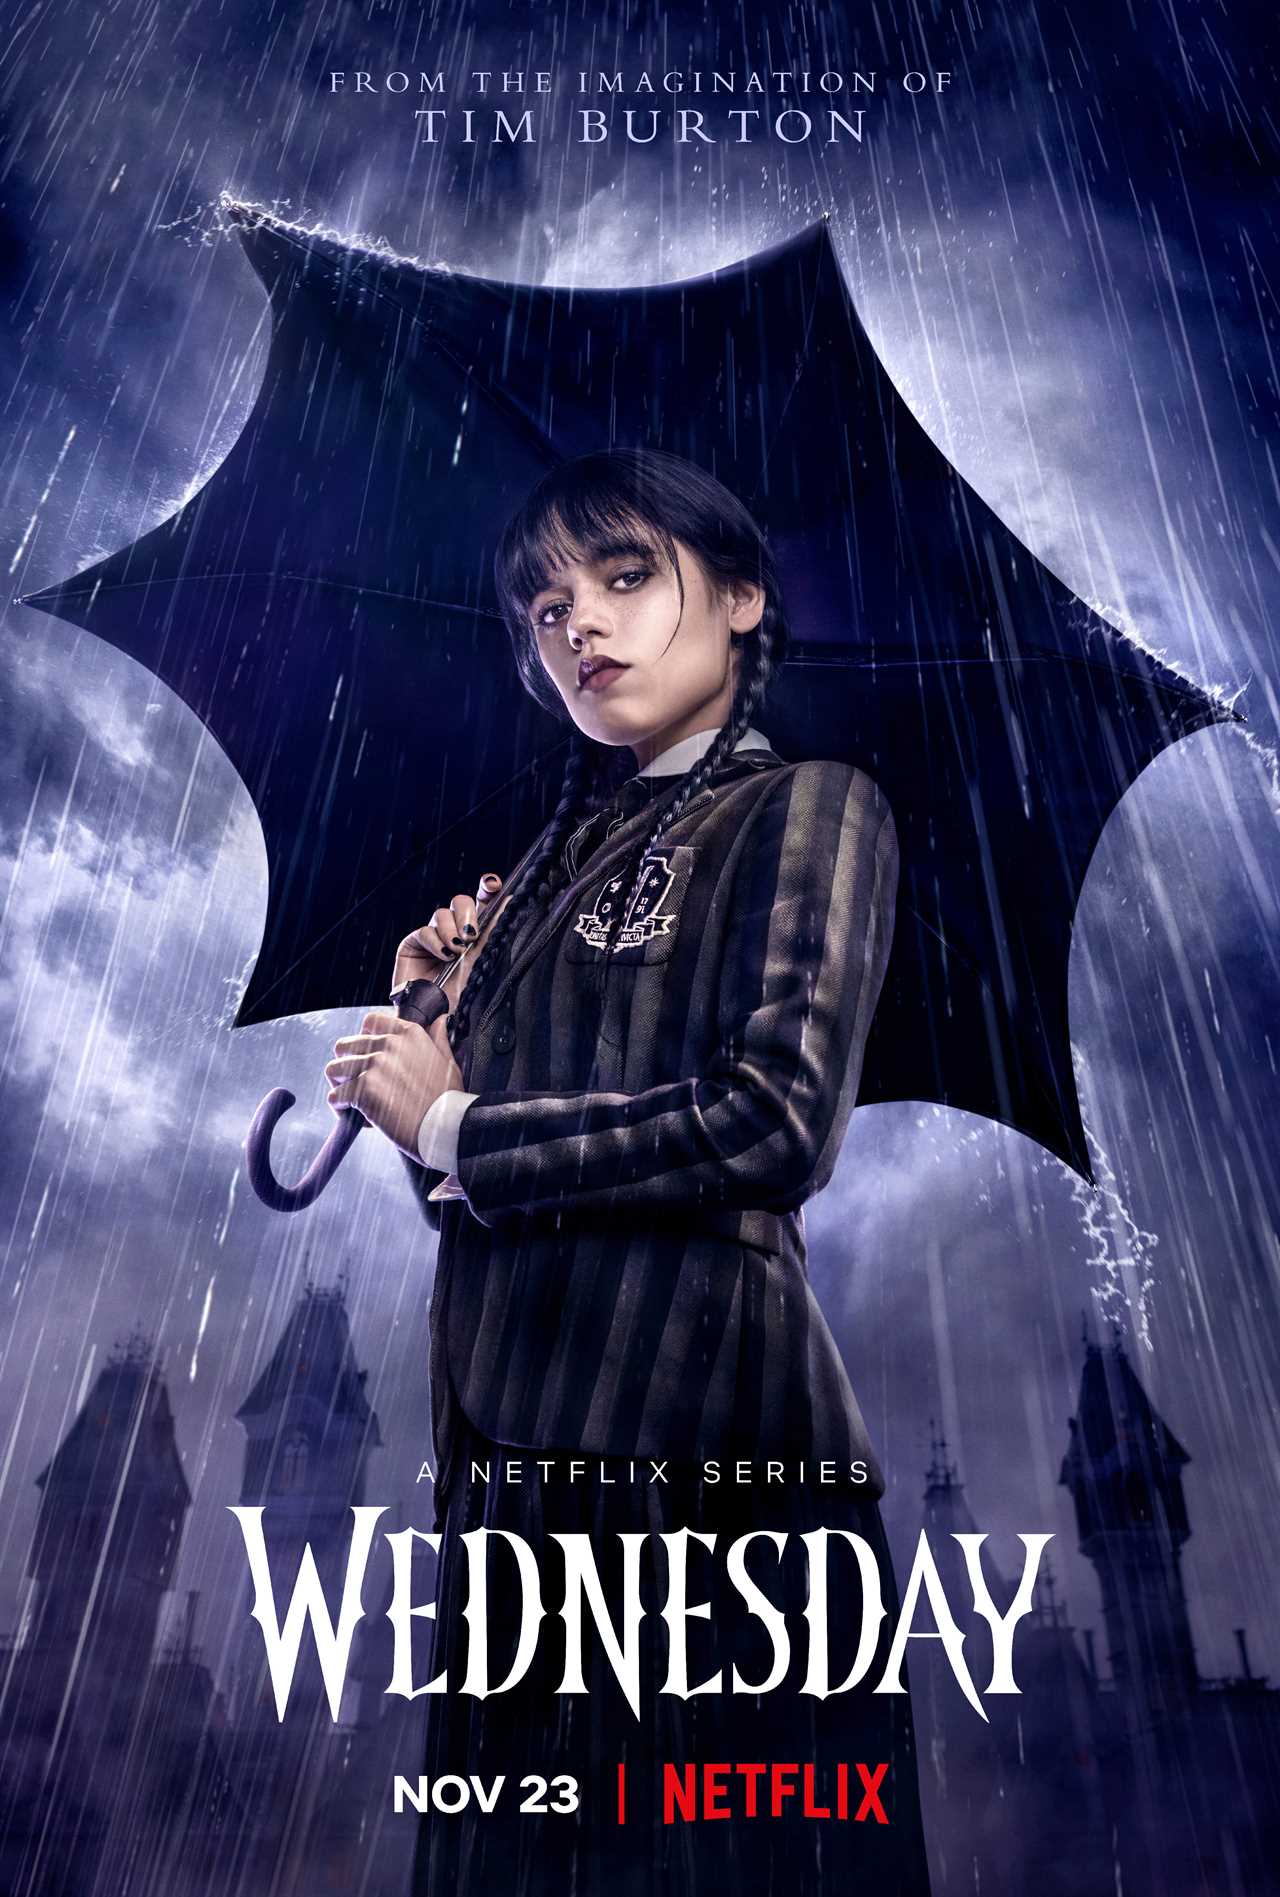 I’m neurodivergent and here’s my issue with Netflix’s Wednesday